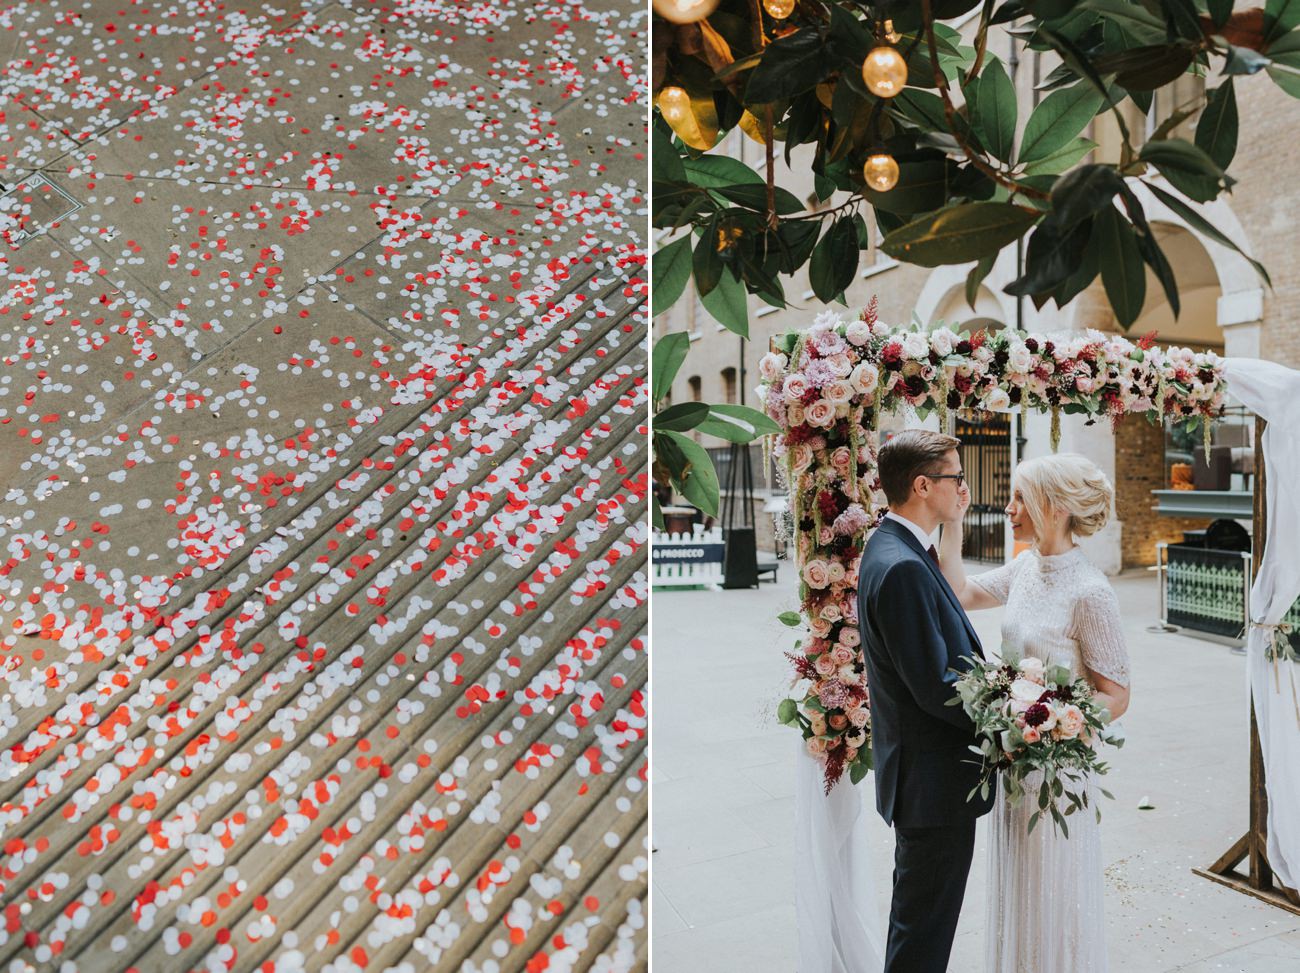 Confetti on the floor and a newlywed couple under an arch or roses.